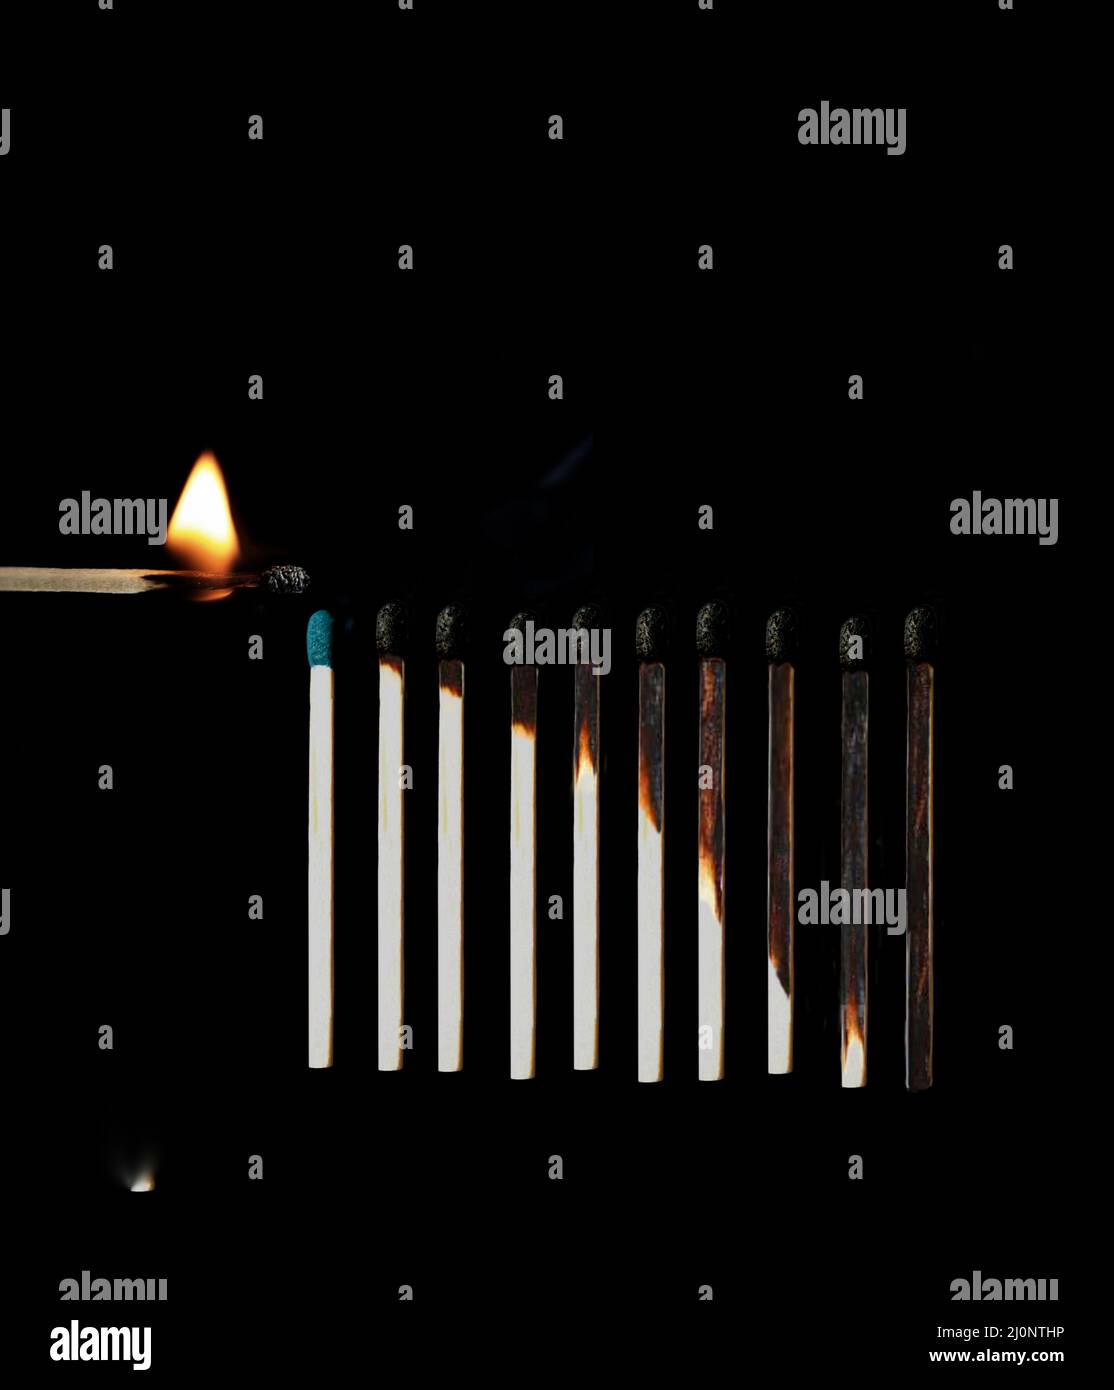 Match stick burning. Match stick in black background. Different stages of match sticks burning. Match stick.  Burnt matchsticks in black background . Stock Photo